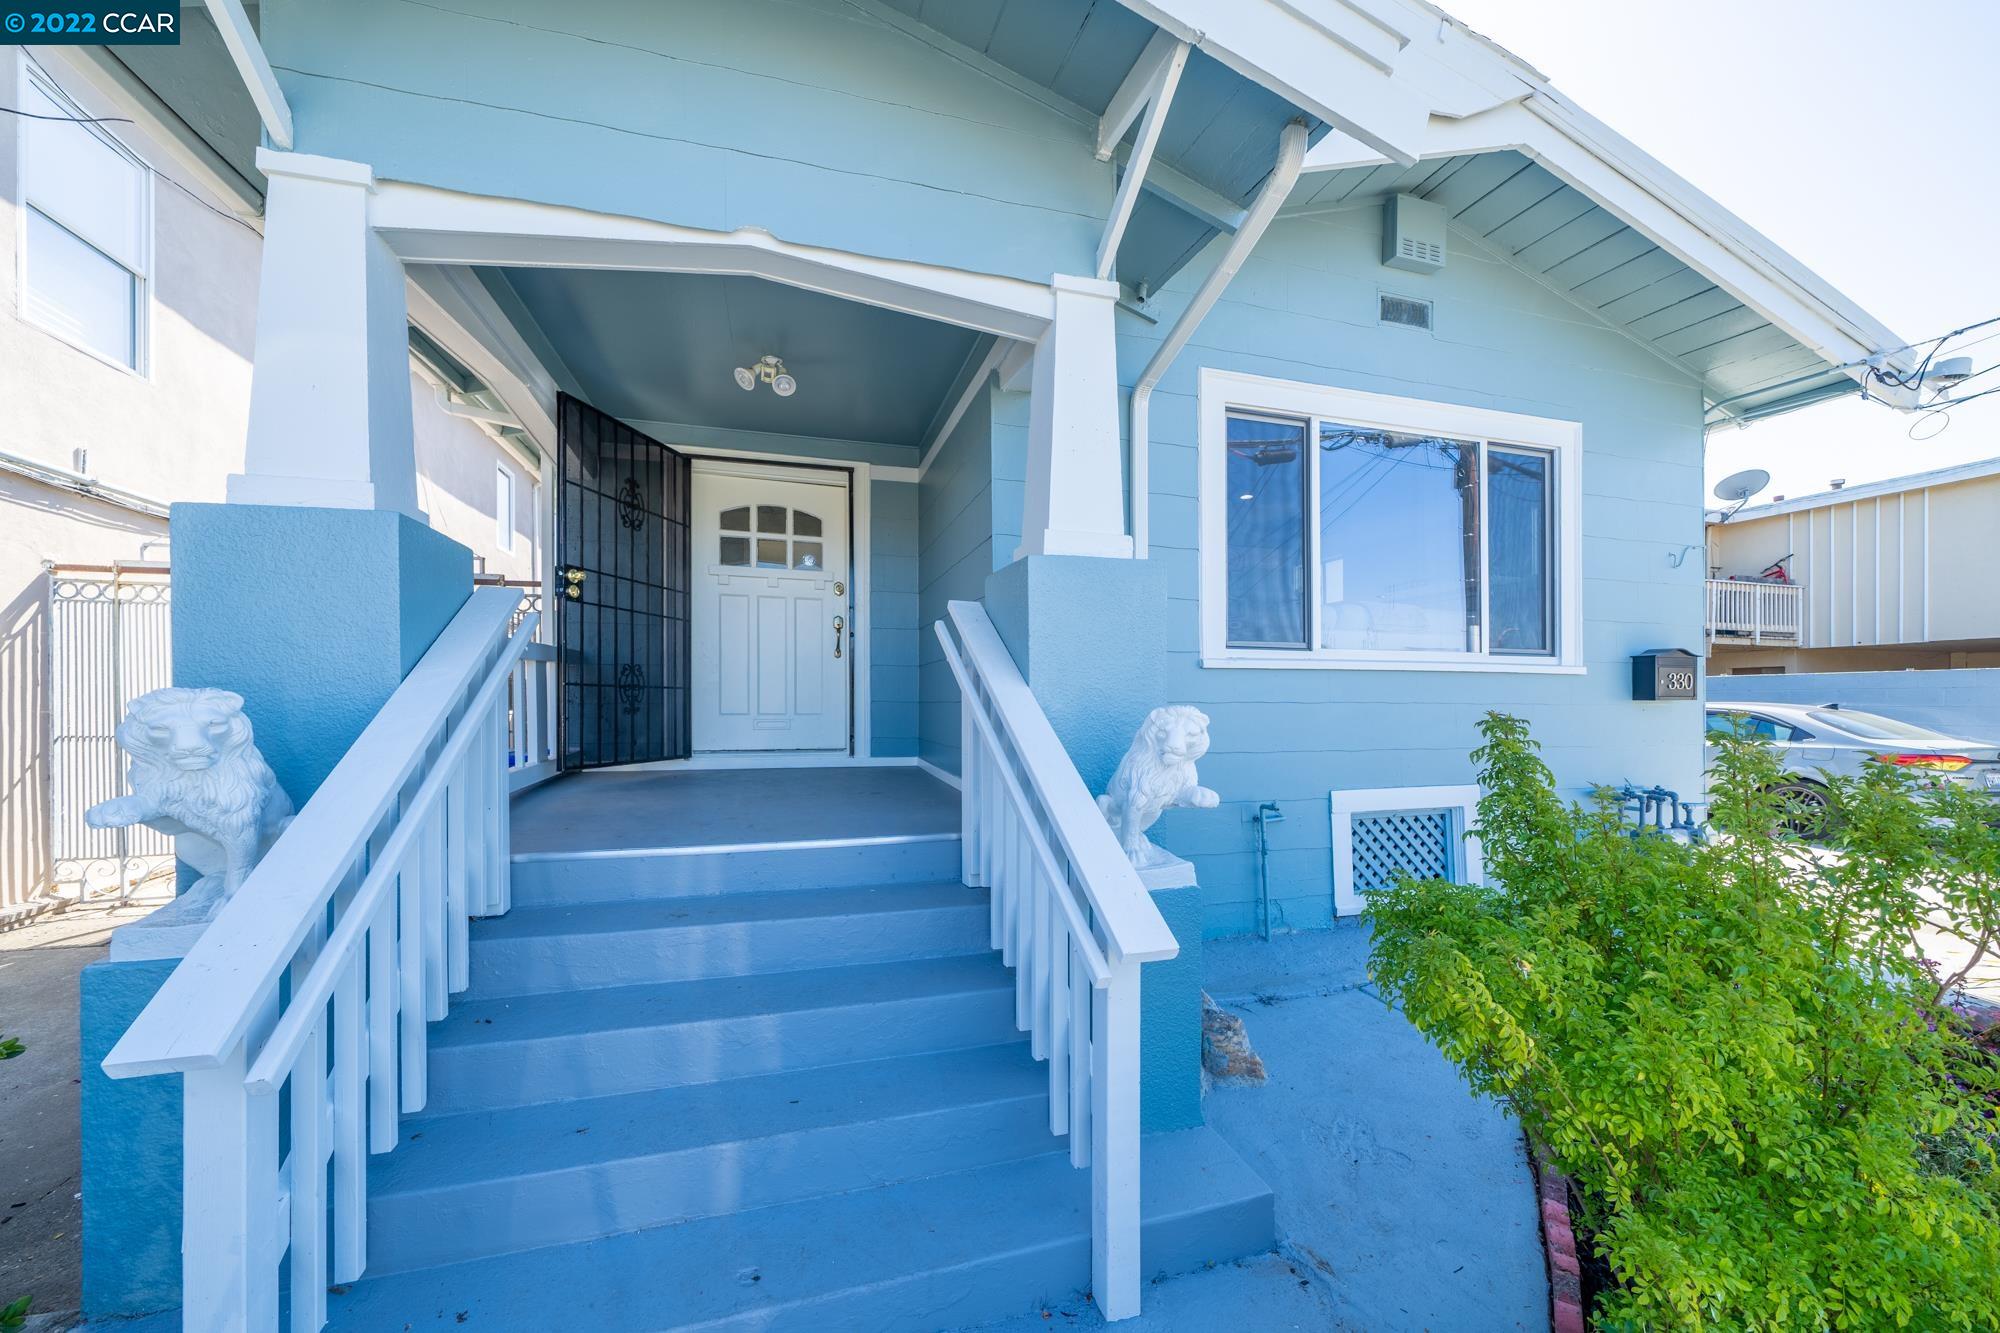 Photo of 330 39th St in Richmond, CA